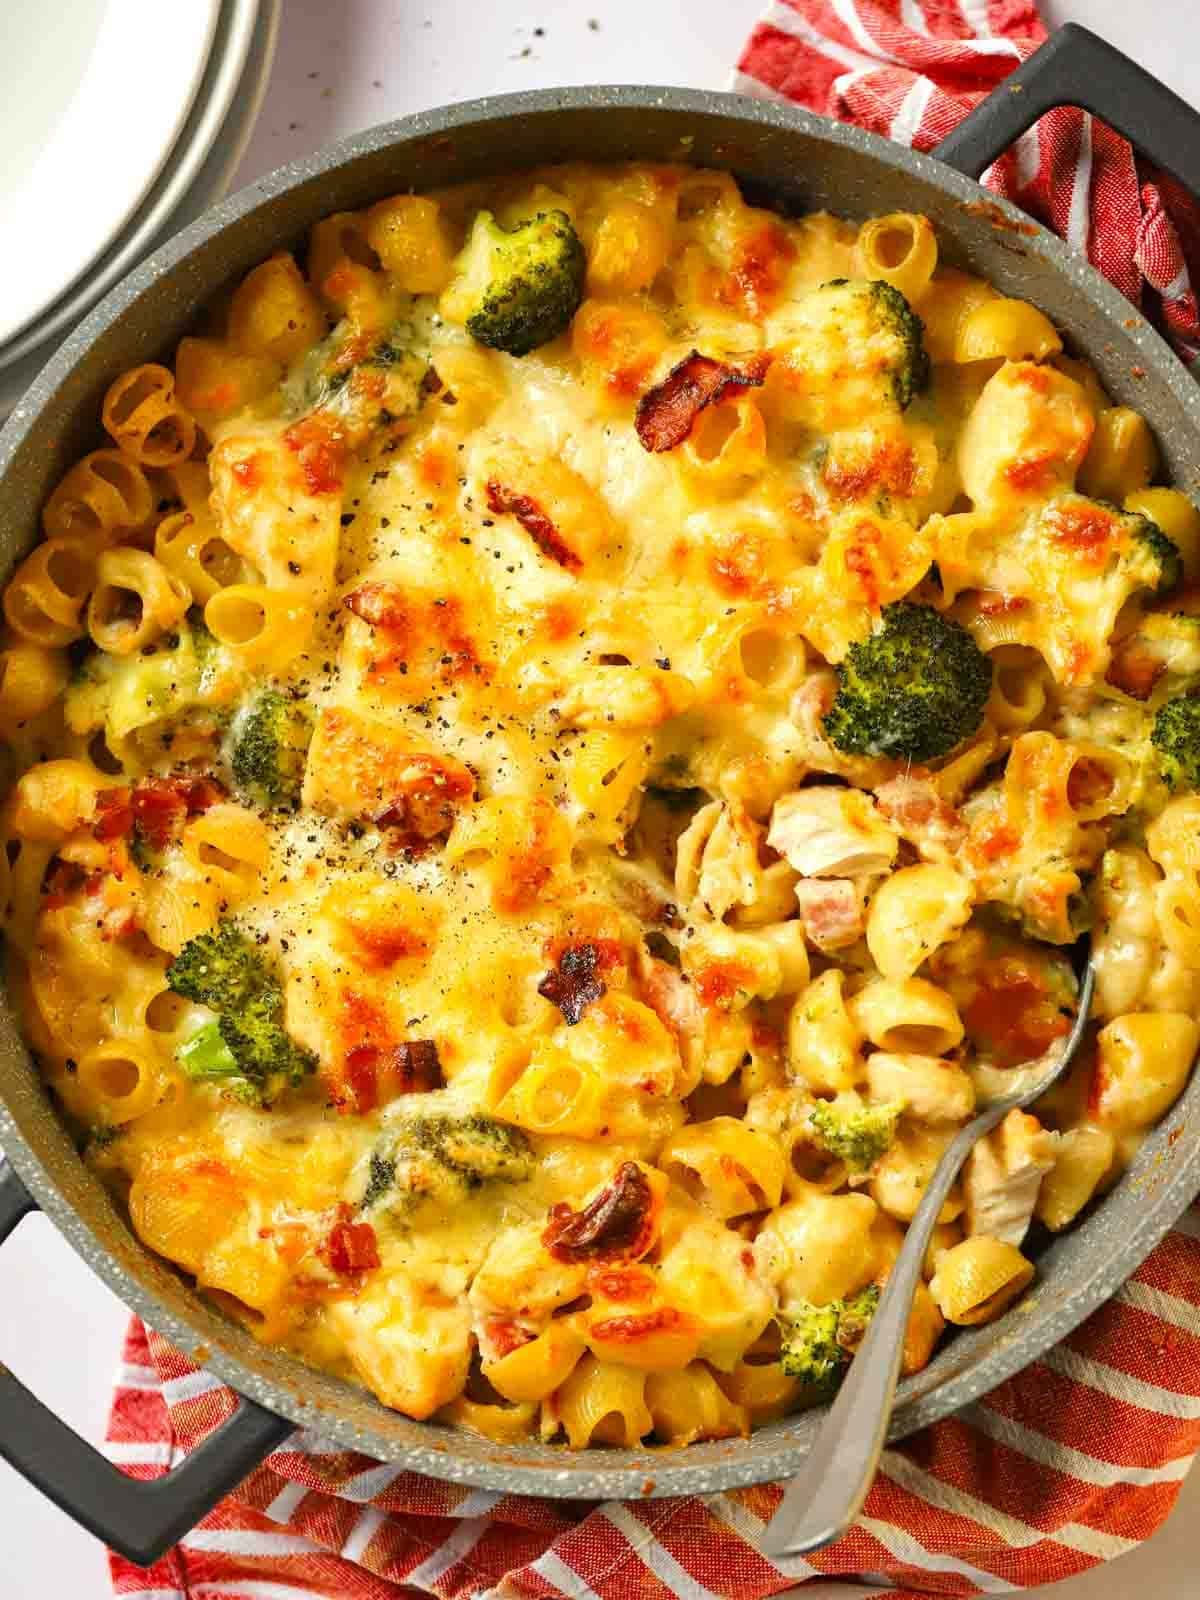 Air fryer pasta bake - ready in 20 minutes!